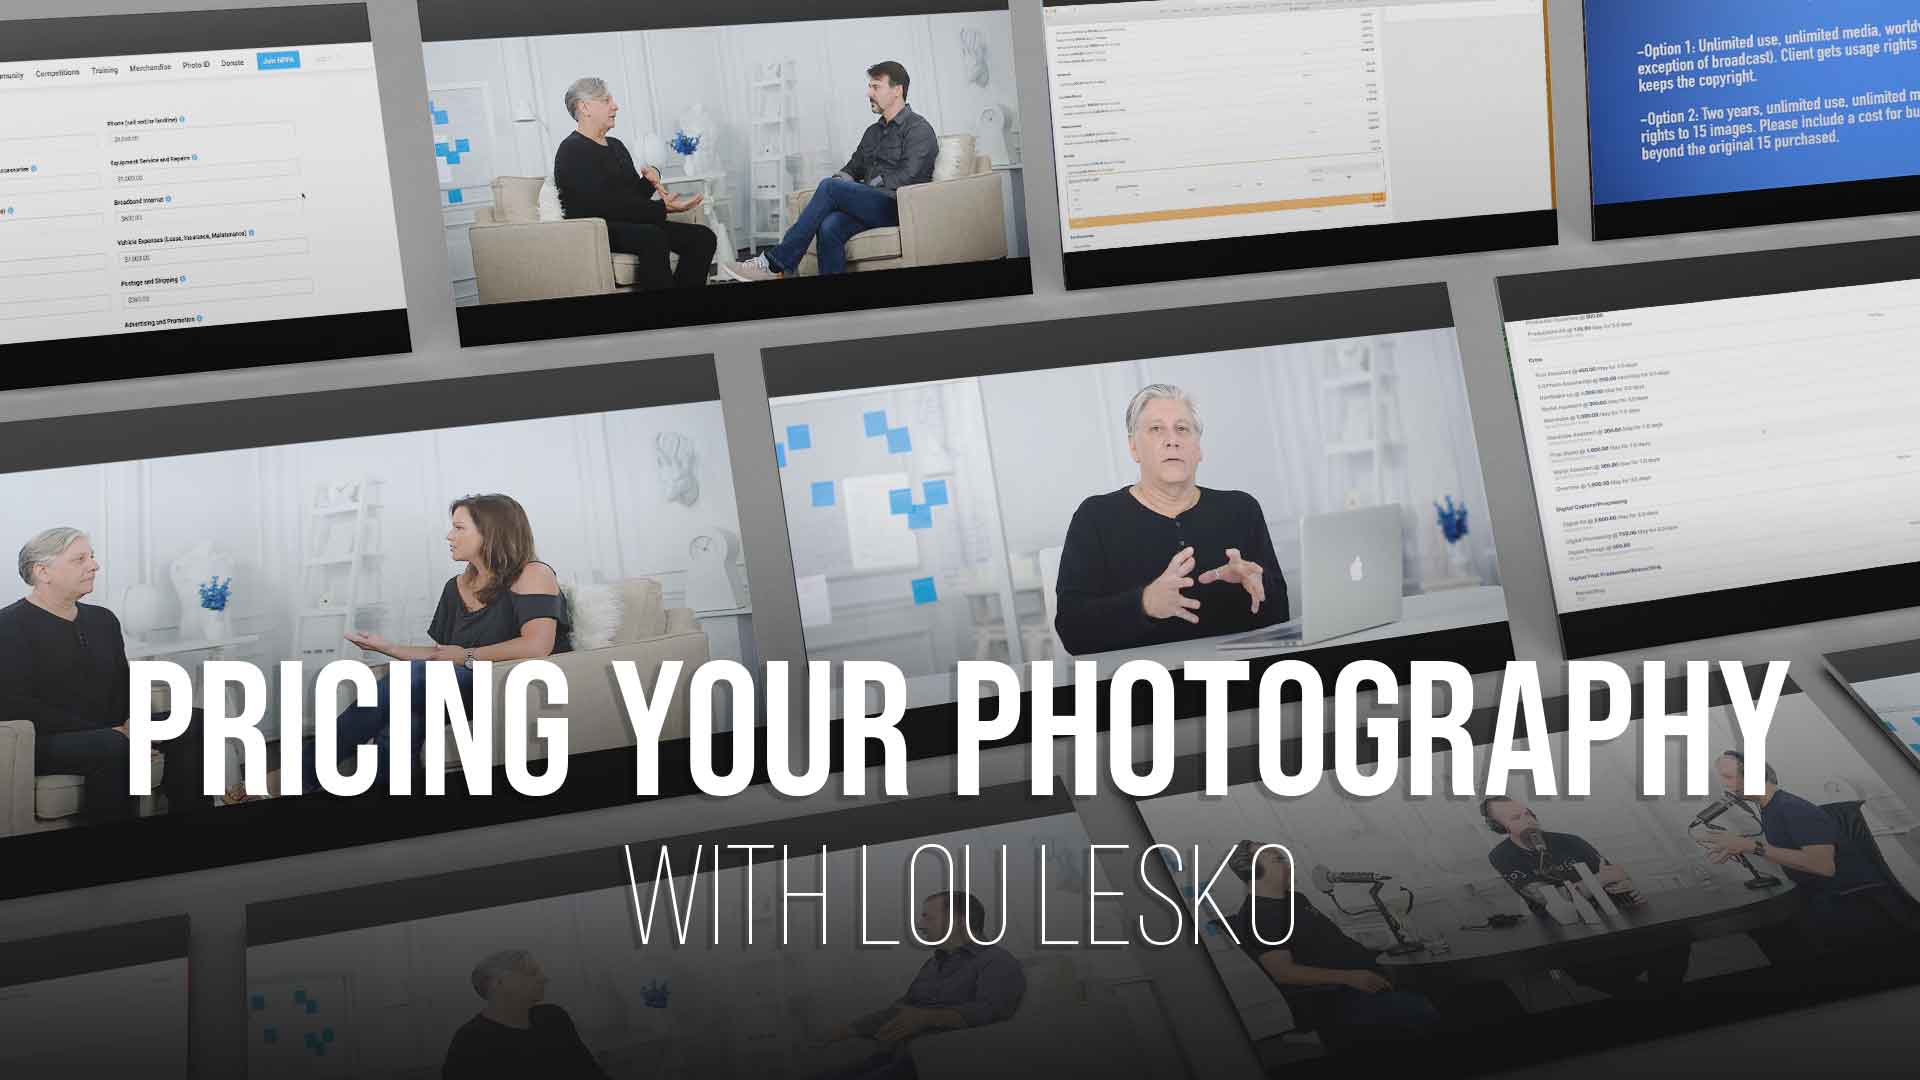 This PRO EDU tutorial with Lou Lesko helps you price your photography for a profitable photography business.